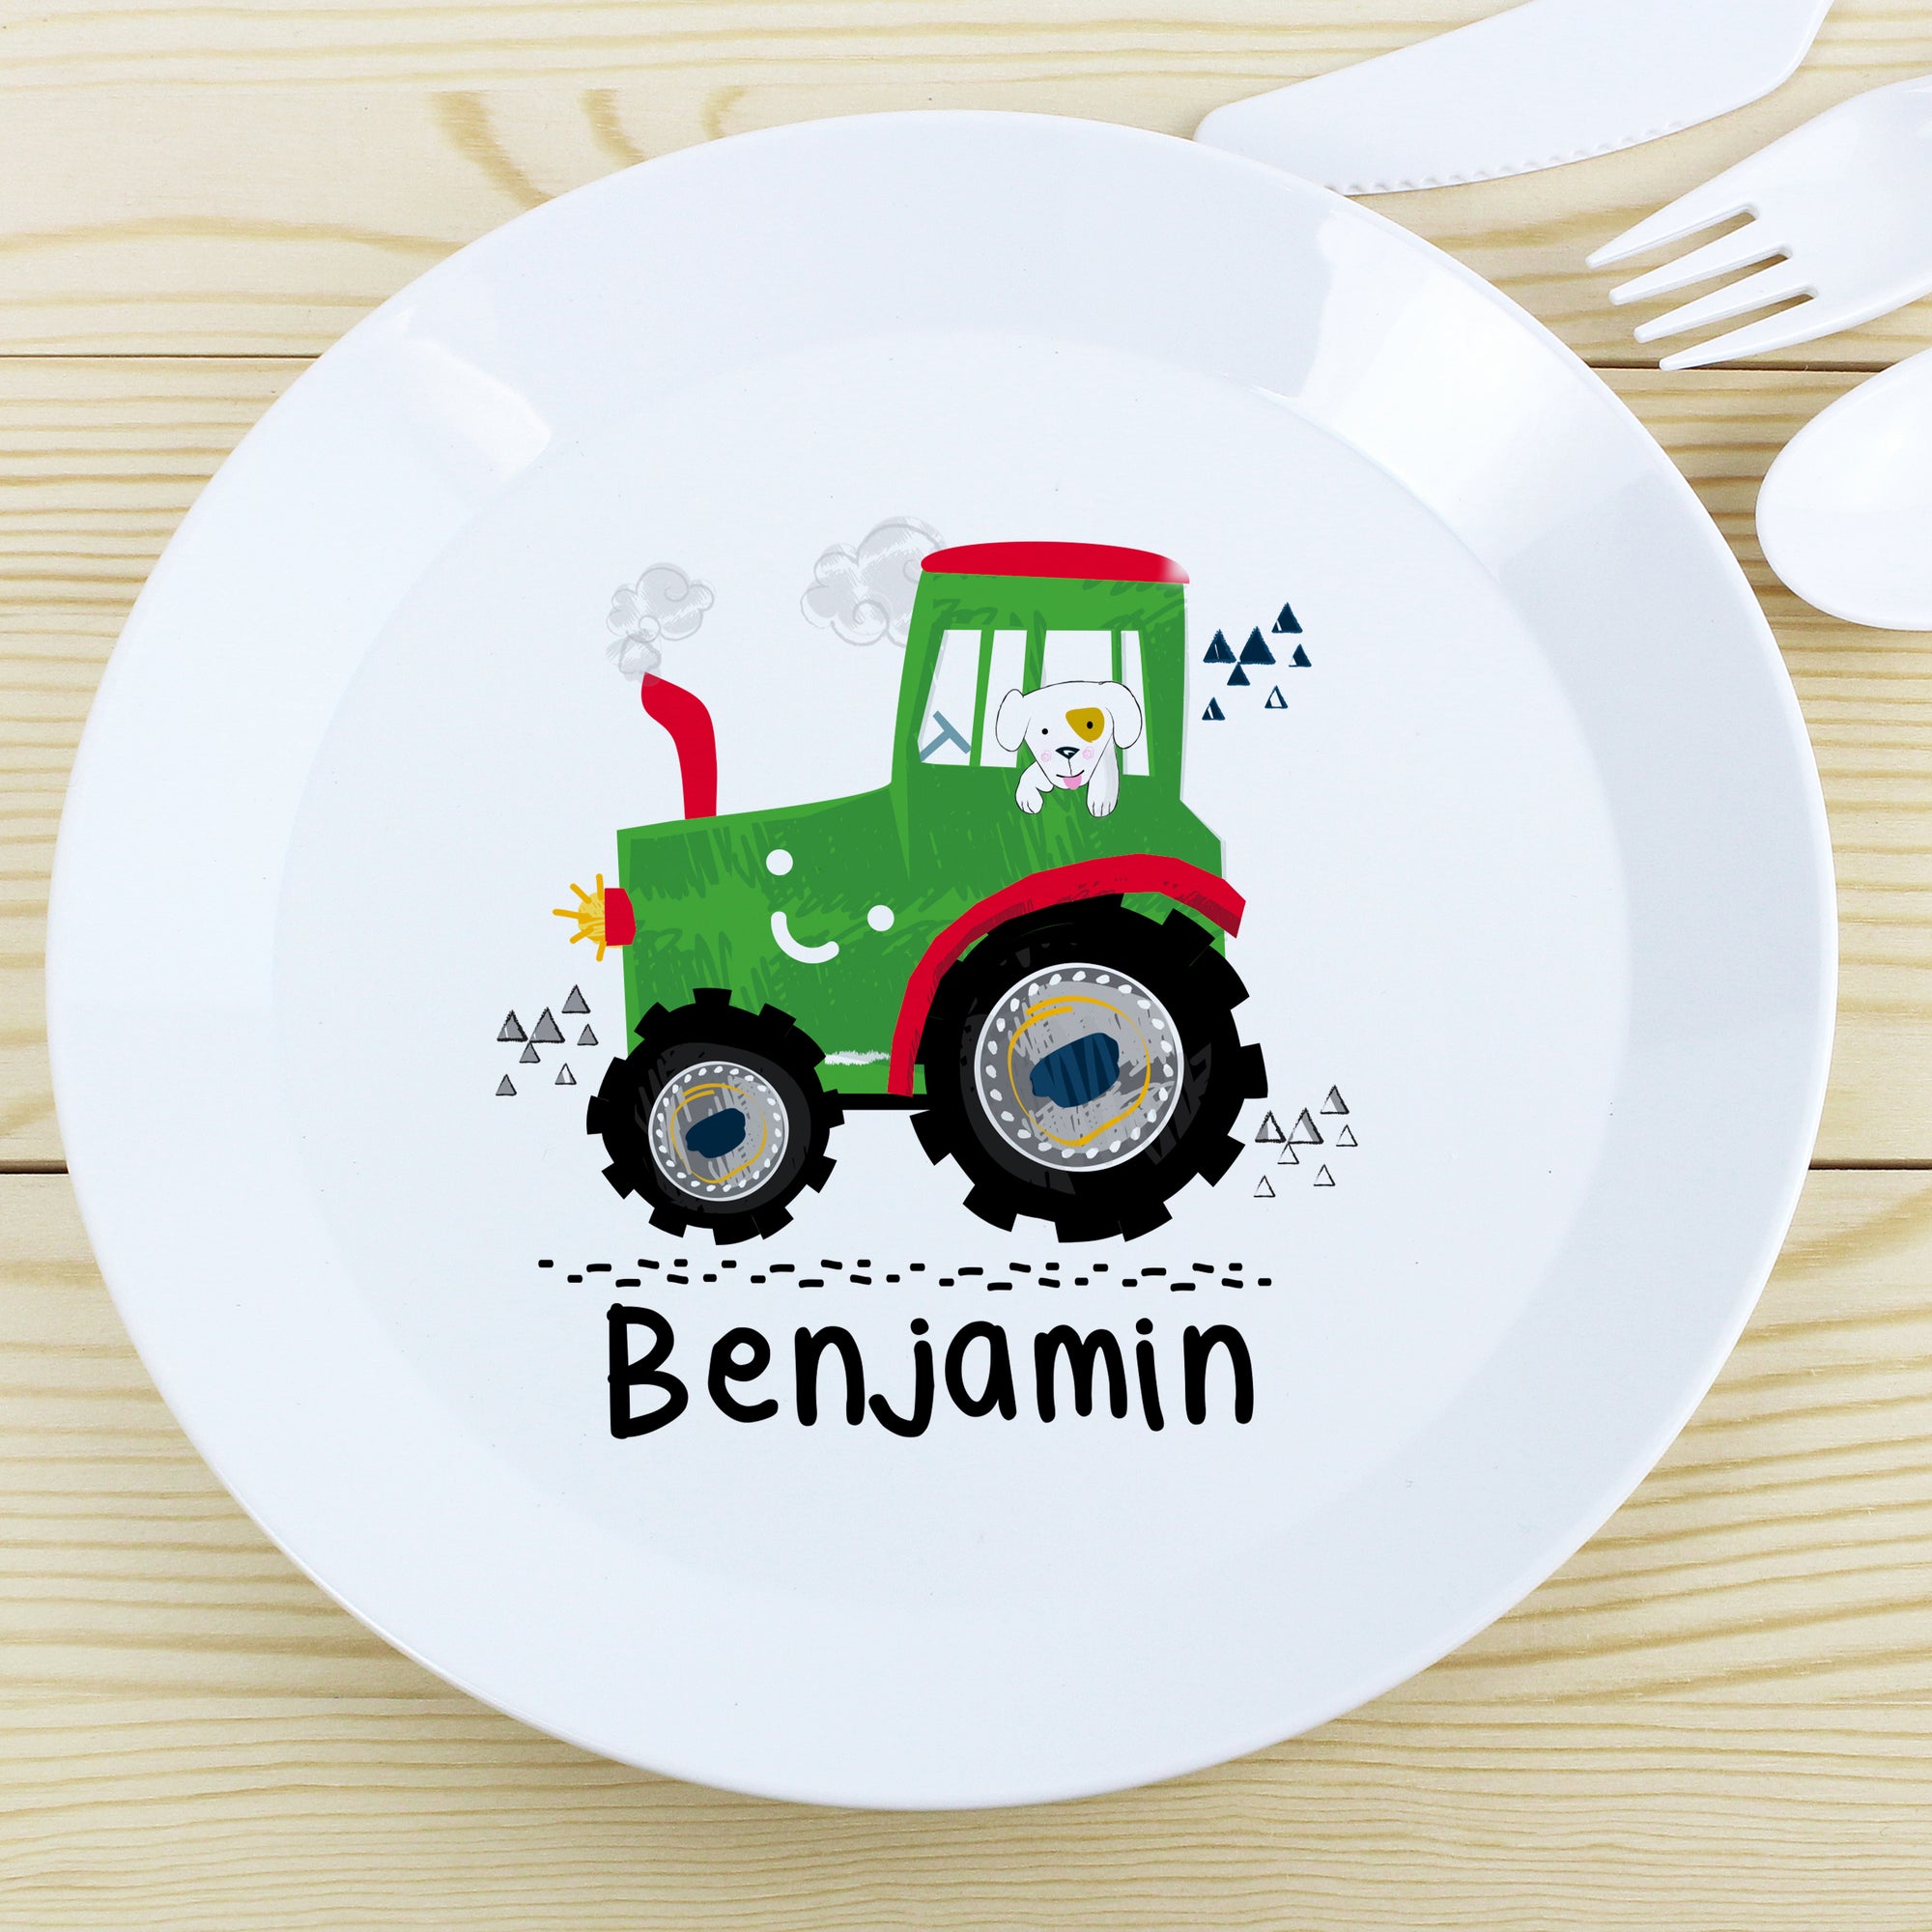 Image of a white plastic BPA free childs personalised plate. The plate is white with a rim and in the centre of the plate is a cartoon drawing of a green tractor with a dog in the cab. Beneath the image of the tractor the plate can be personalised with a name up to 12 characters in a black font. The plate is part of a set and comes with a cup and cutlery set in the same theme.